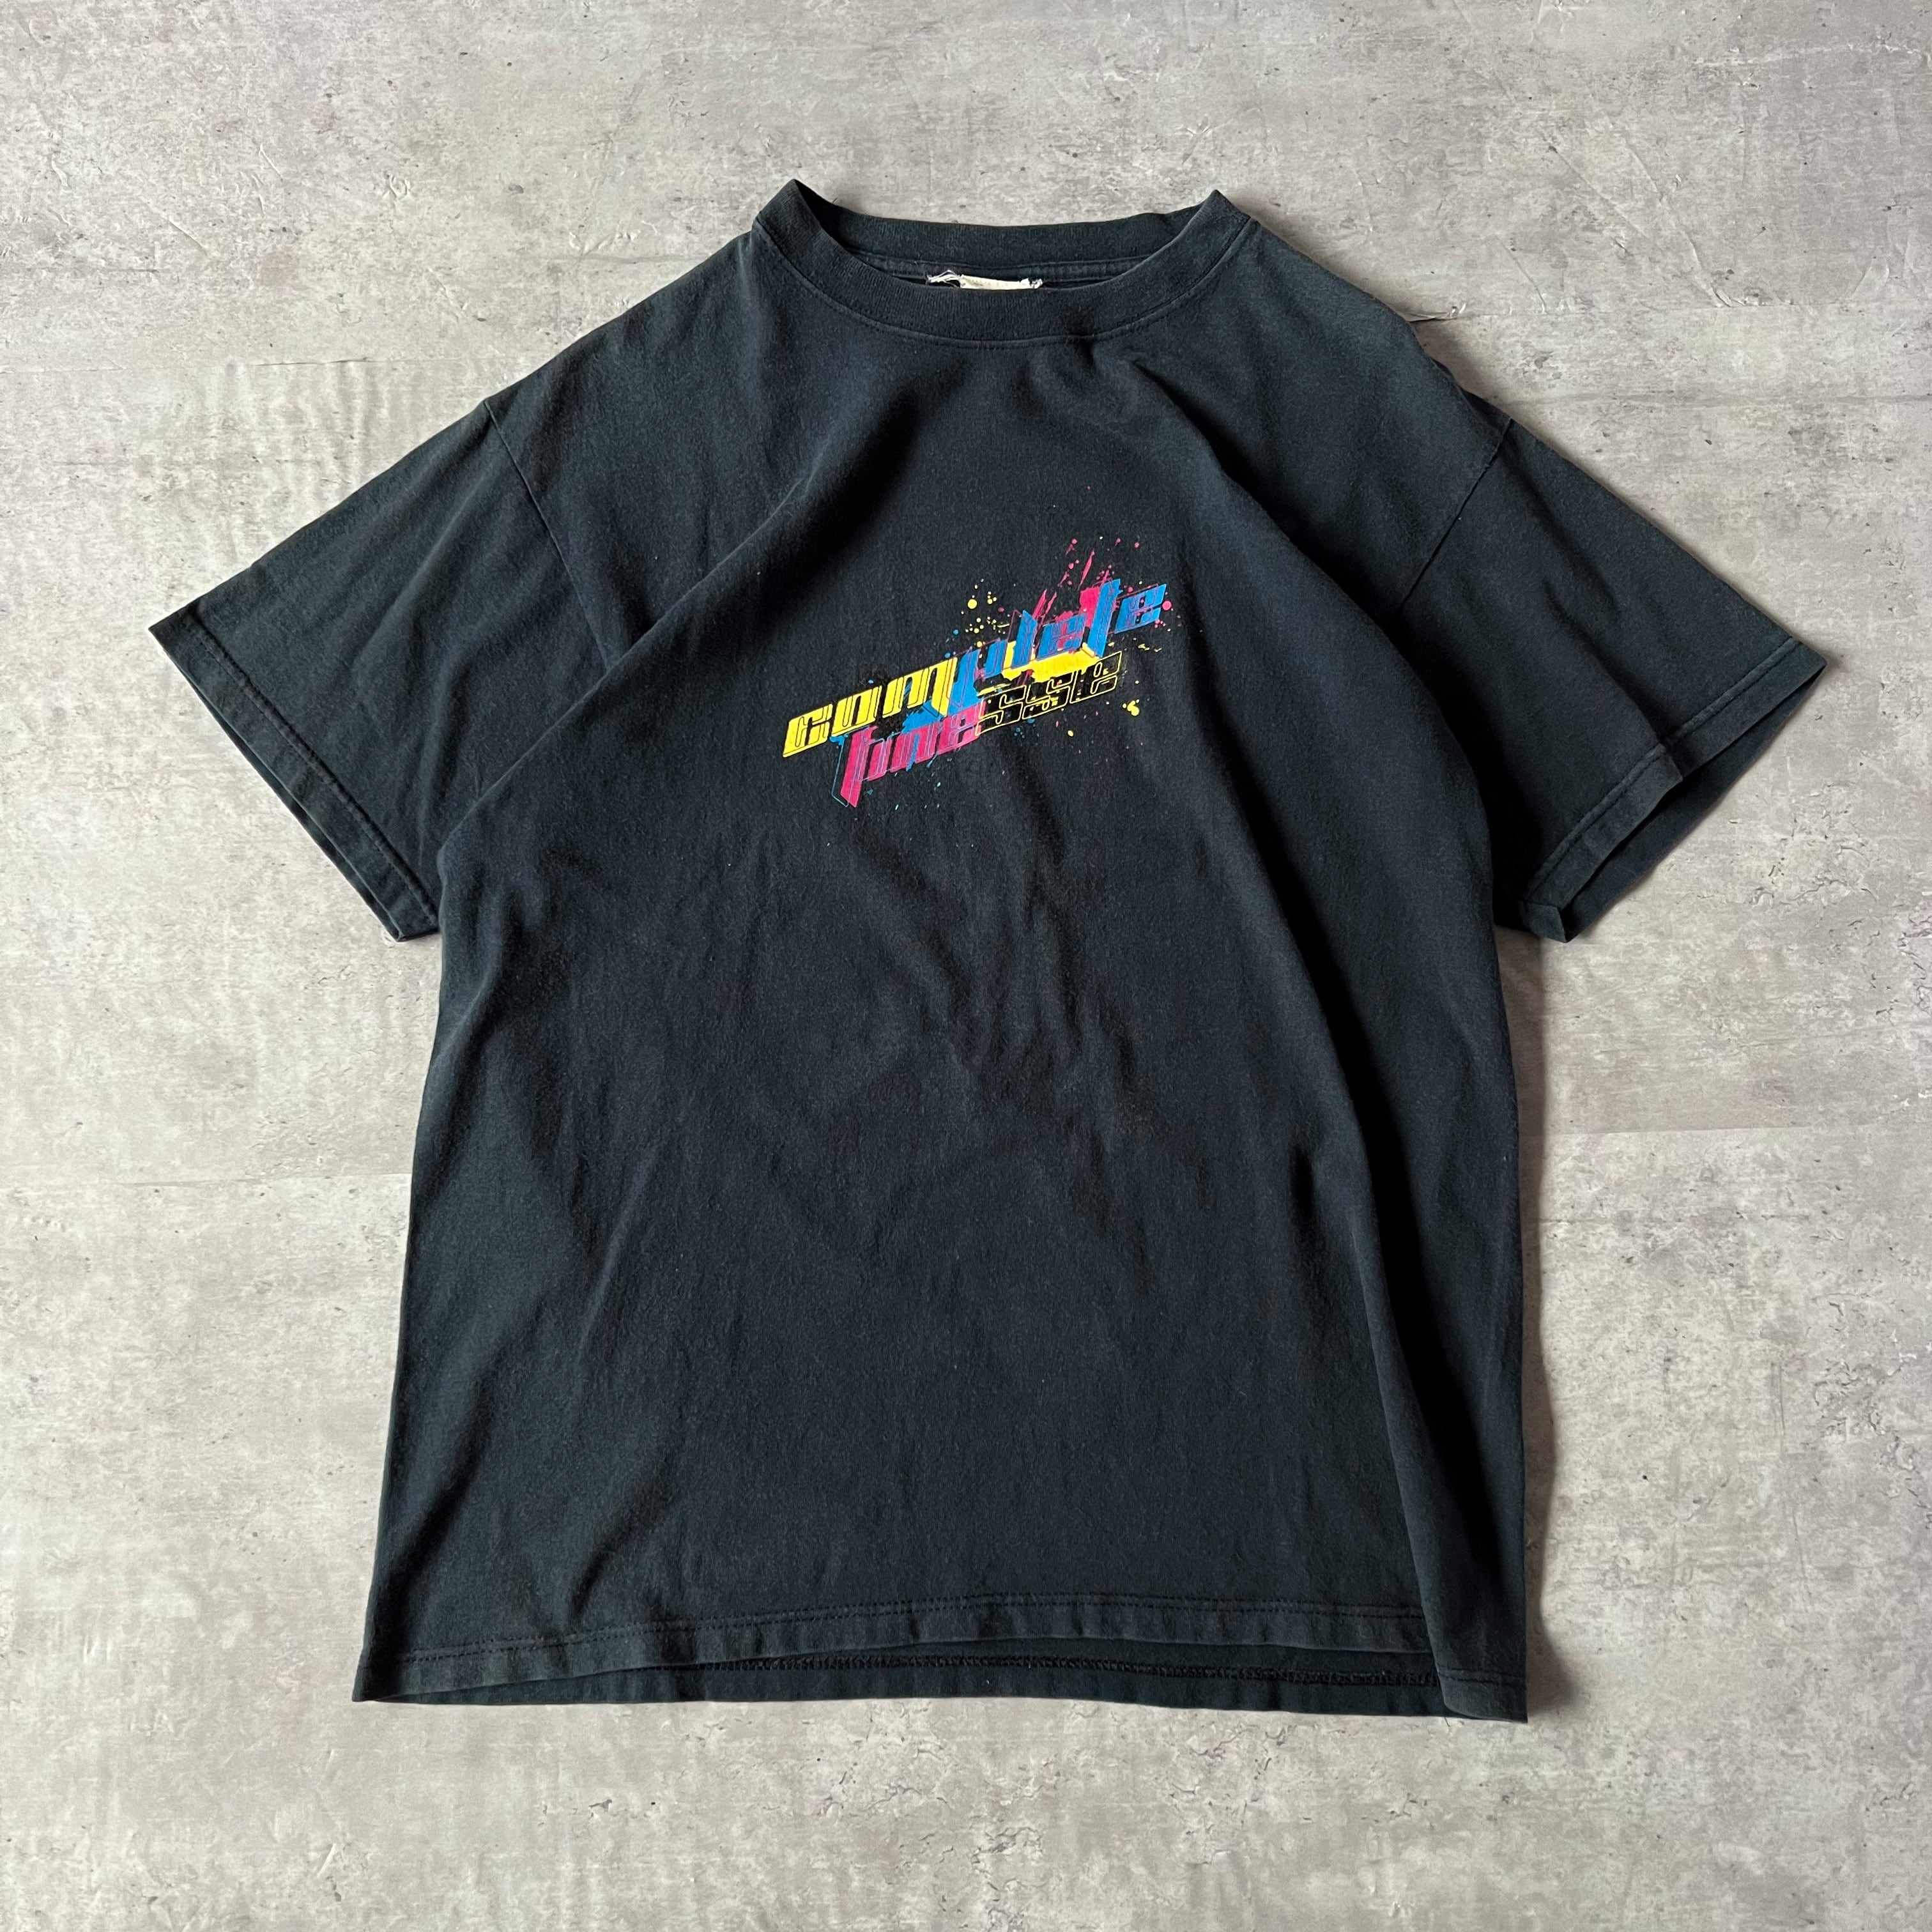 90s 〜 00s “Complete finesse” psychedelic logo tee 90年代 00年代 